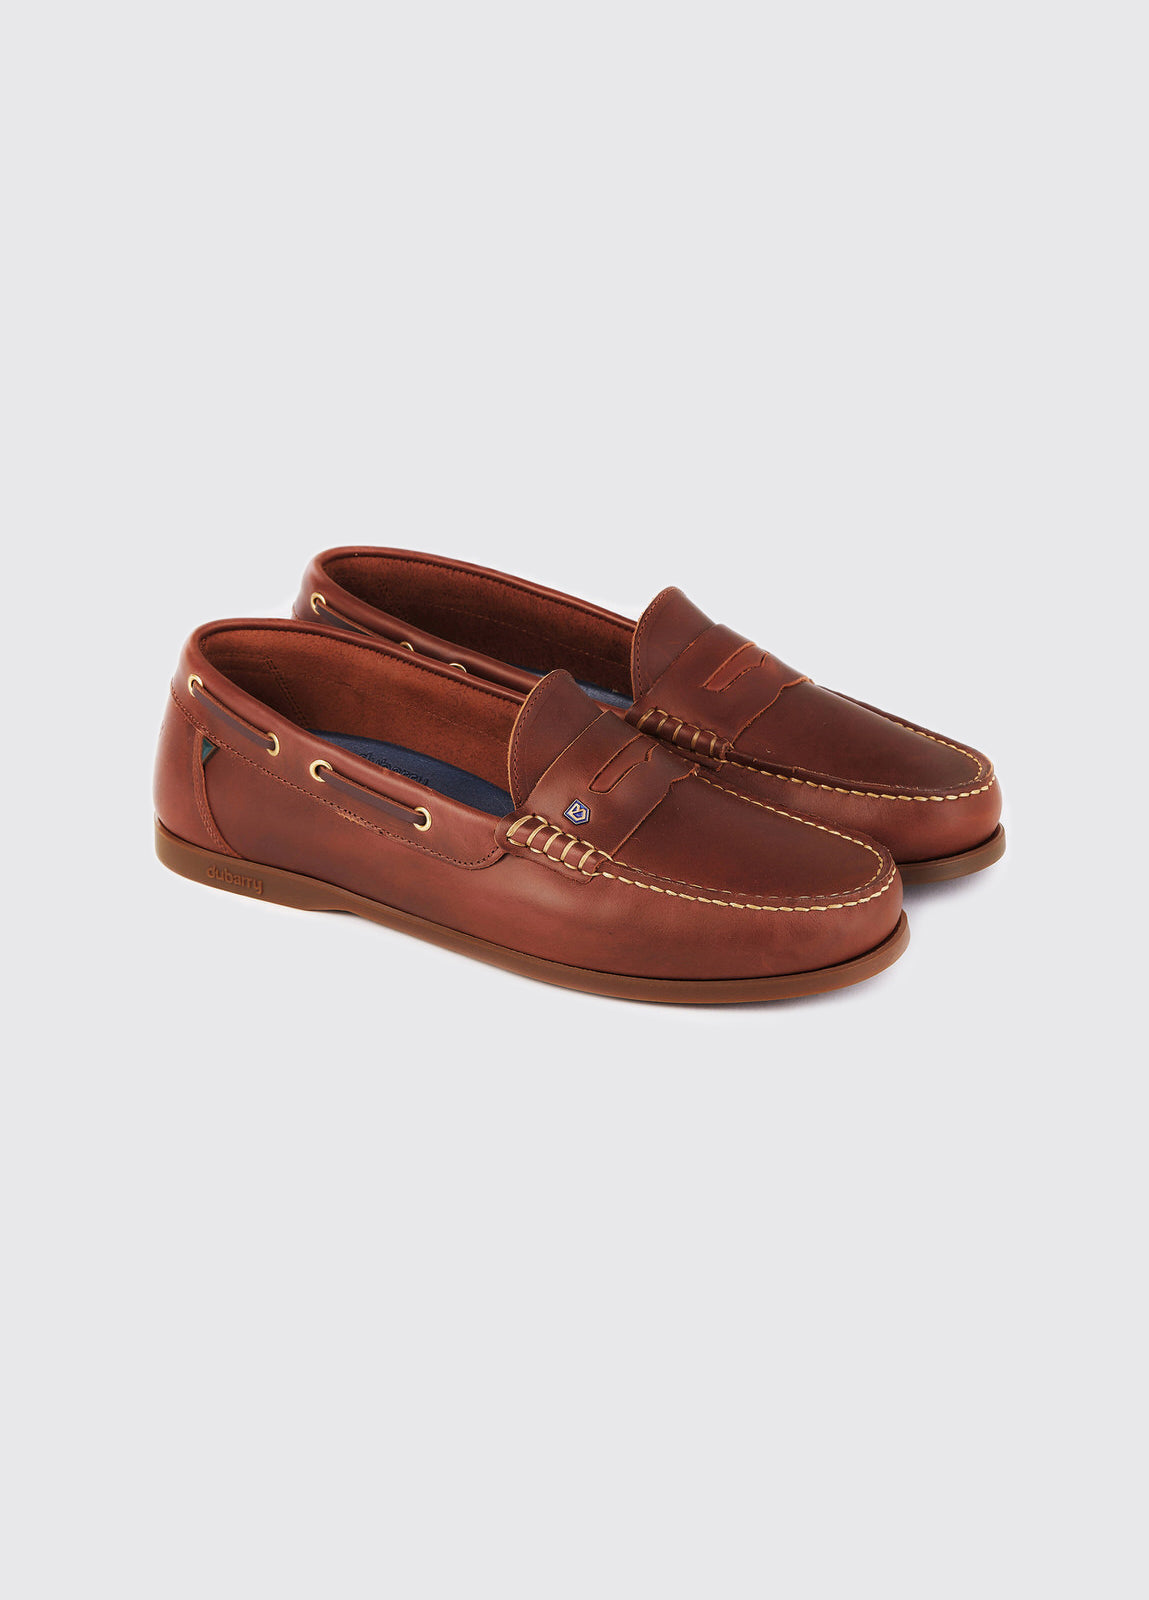 Dubarry Spinnaker Boat Shoes - Brown